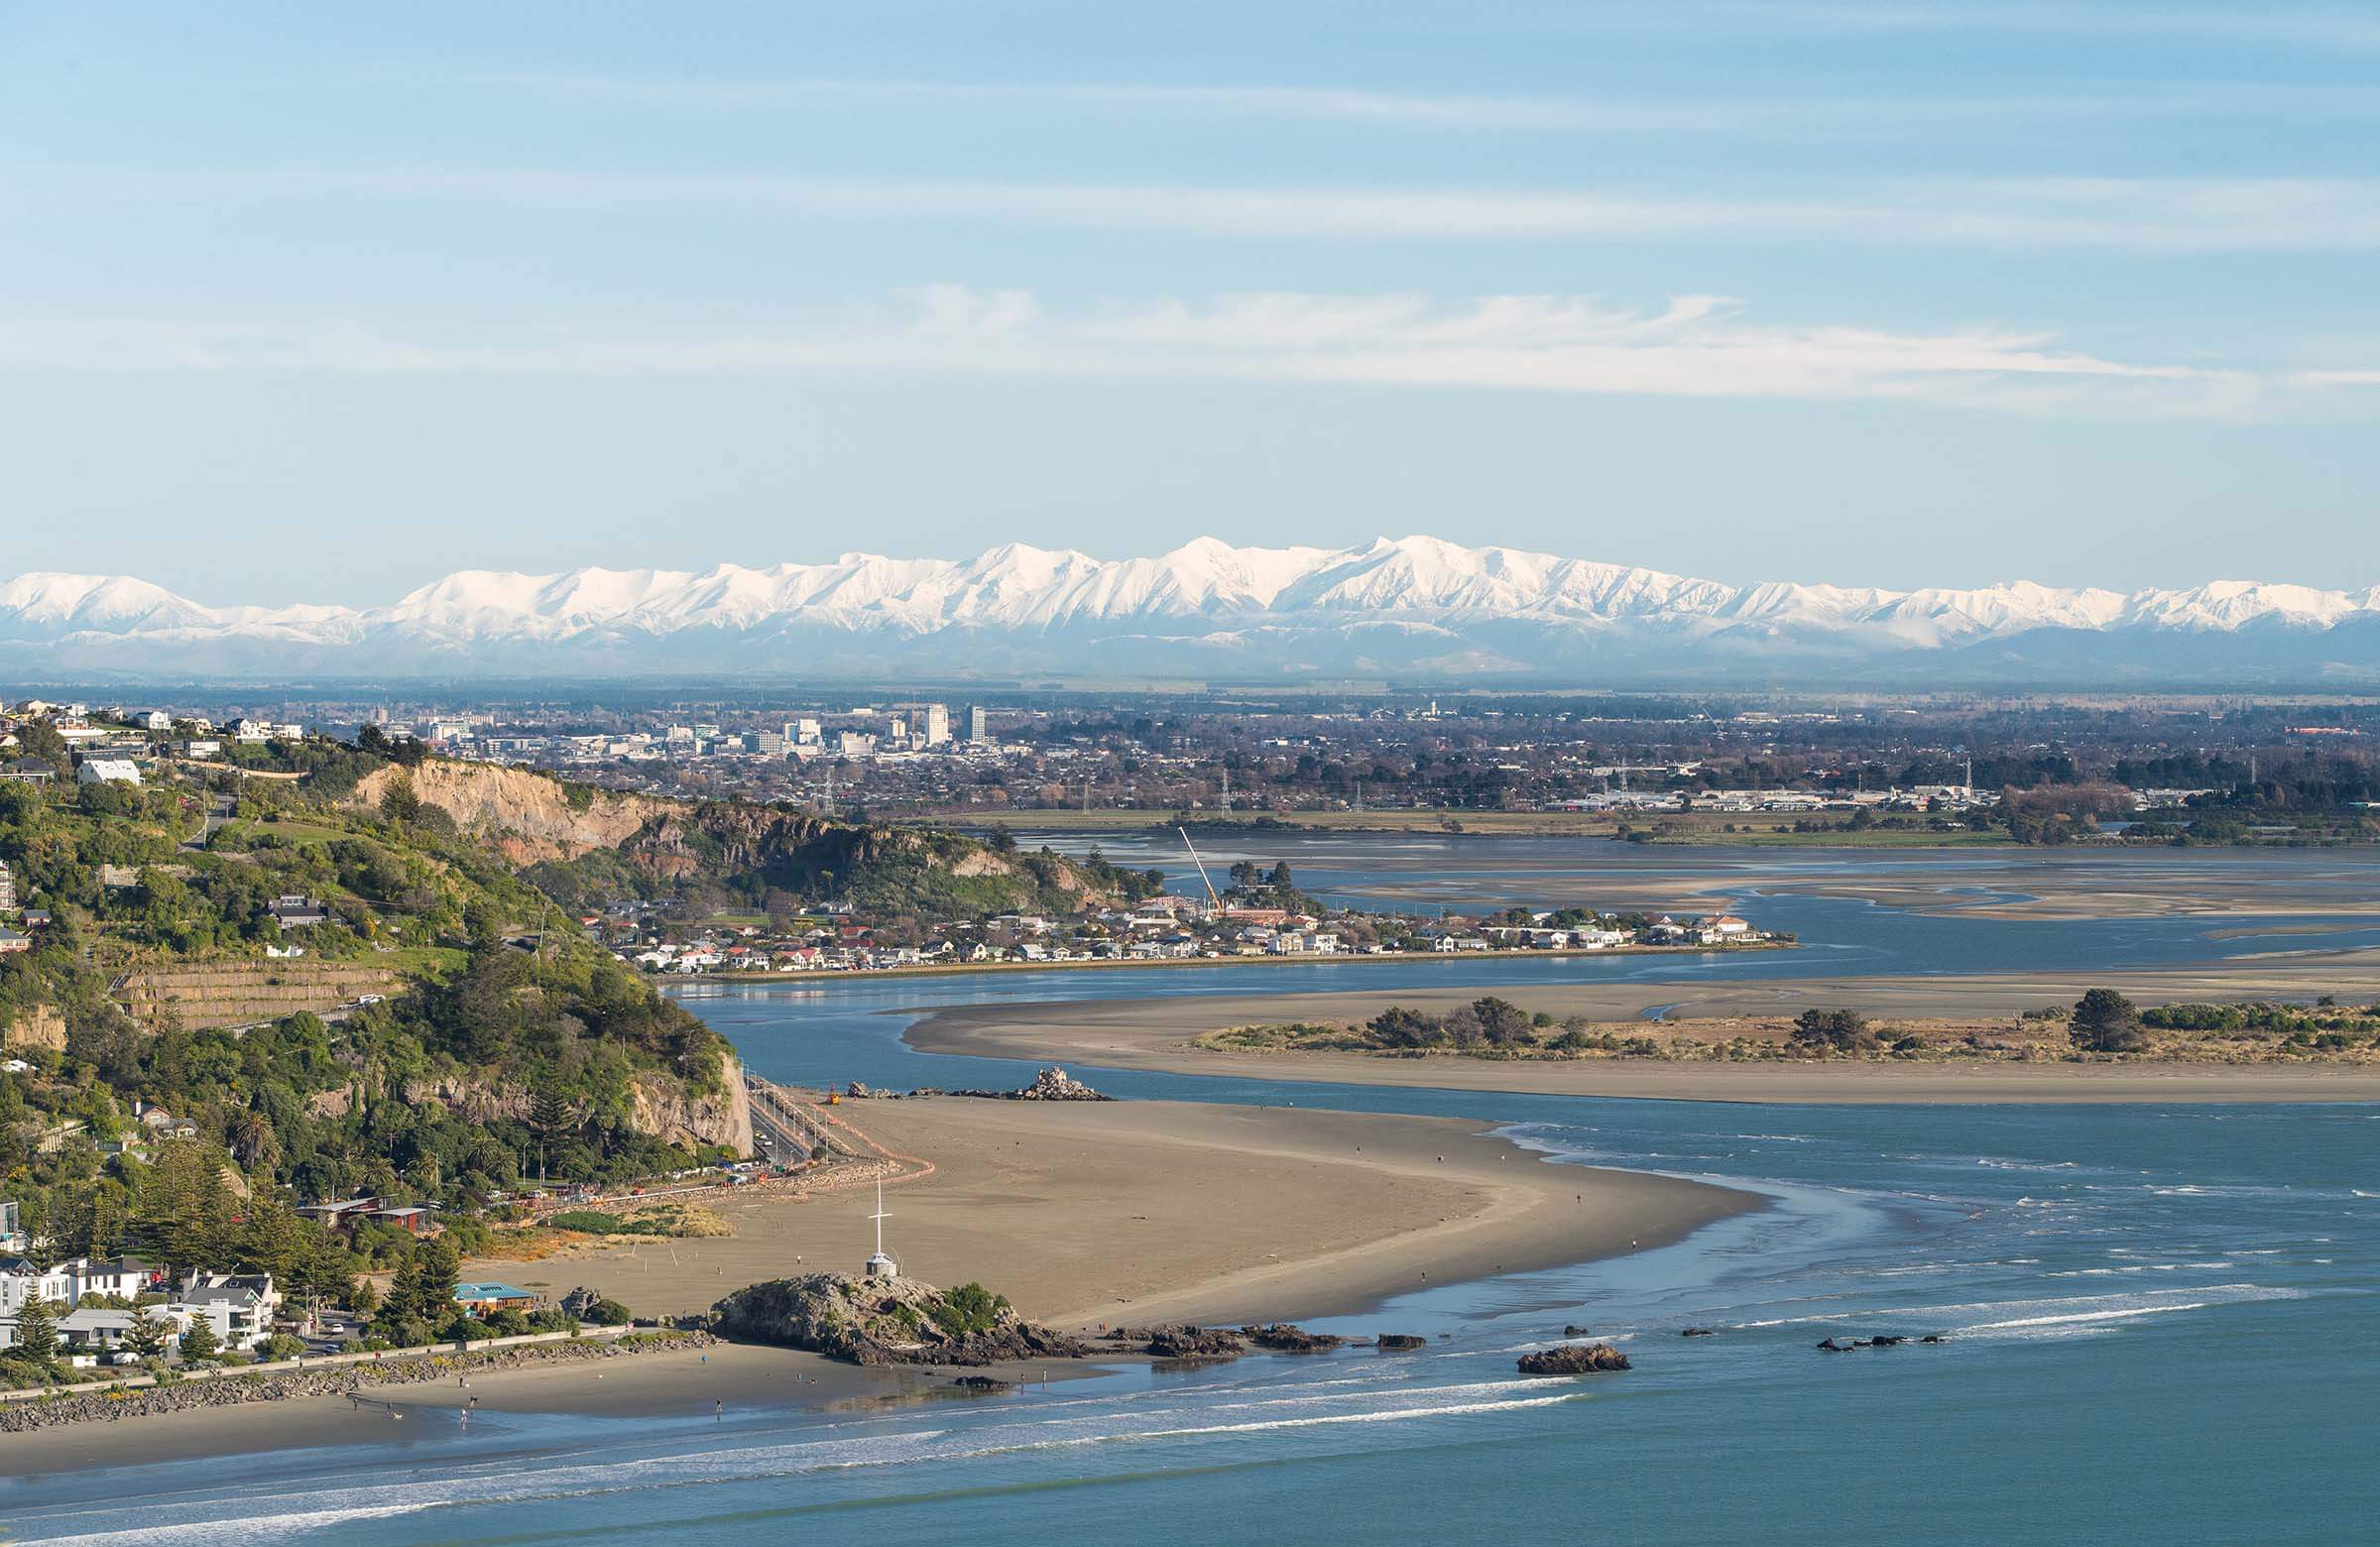 Christchurch City Overview Image Taken 2019 From CCC